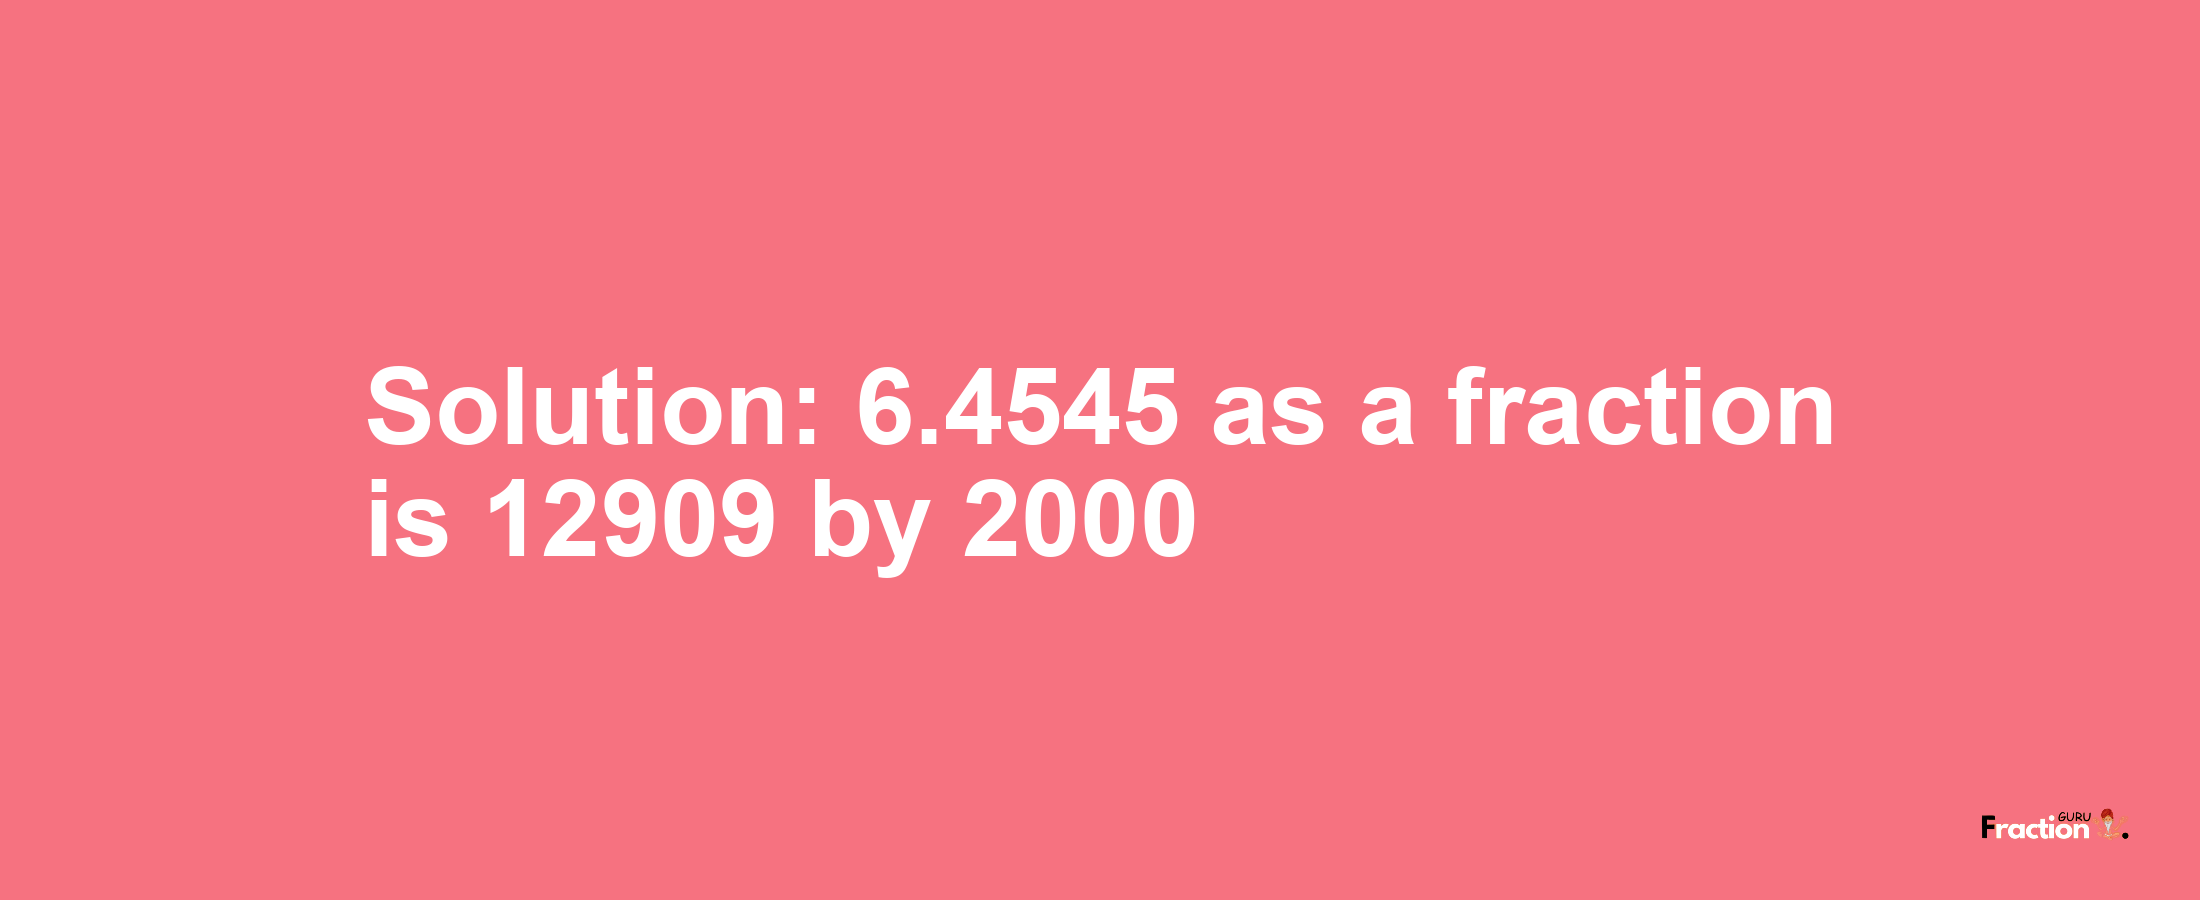 Solution:6.4545 as a fraction is 12909/2000